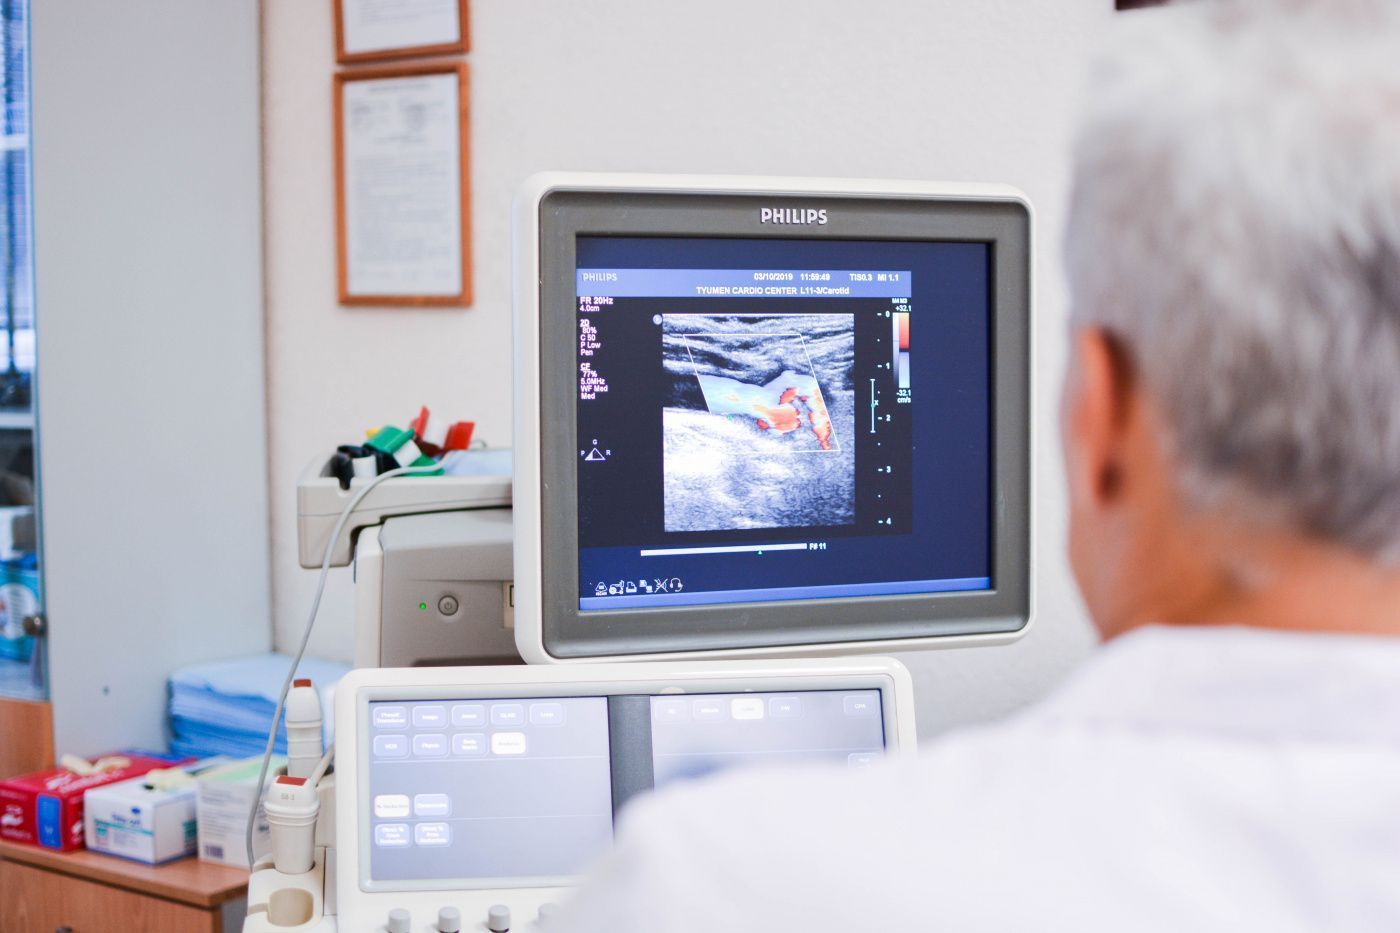 Up to date echocardiography in our center